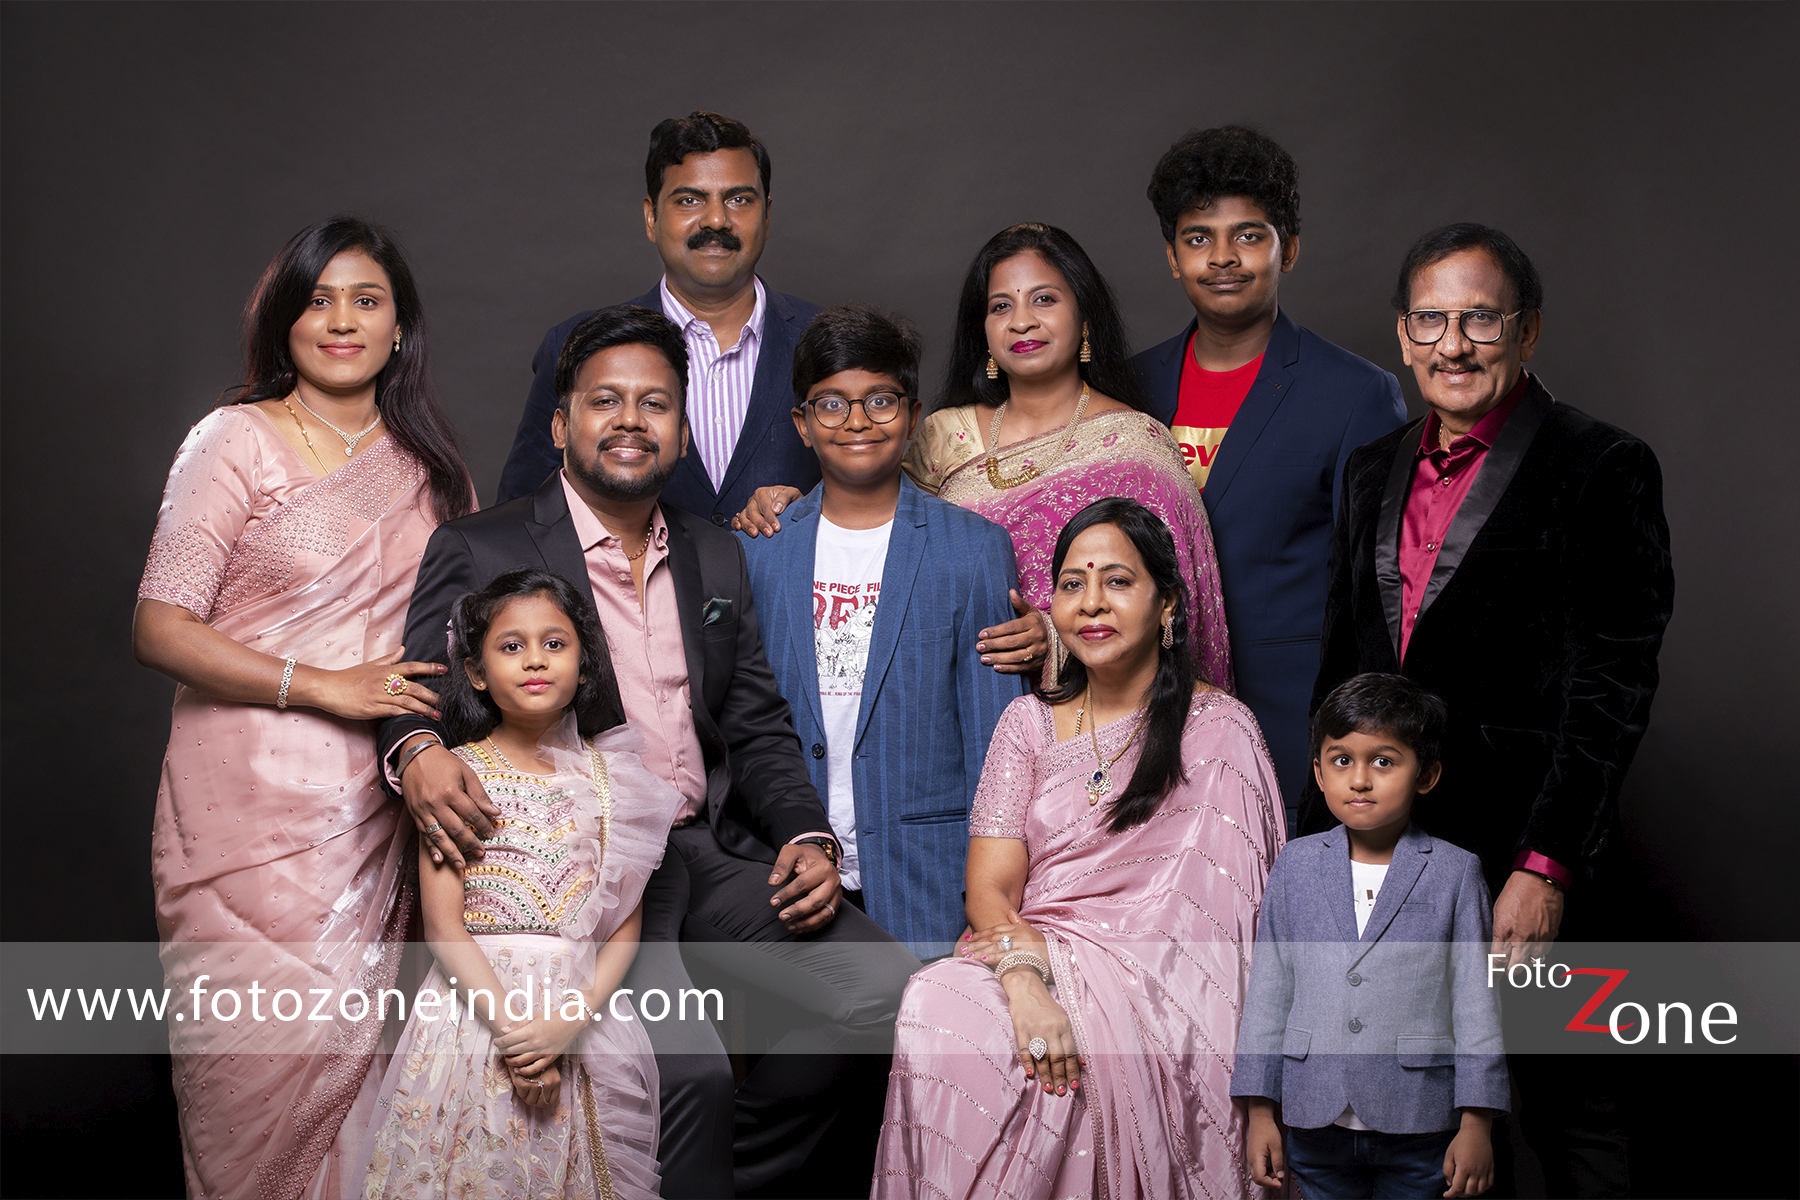 Lafayette Square Park Family Session: The Balasuriya's - Nashville and St.  Louis Wedding and Family Photographer